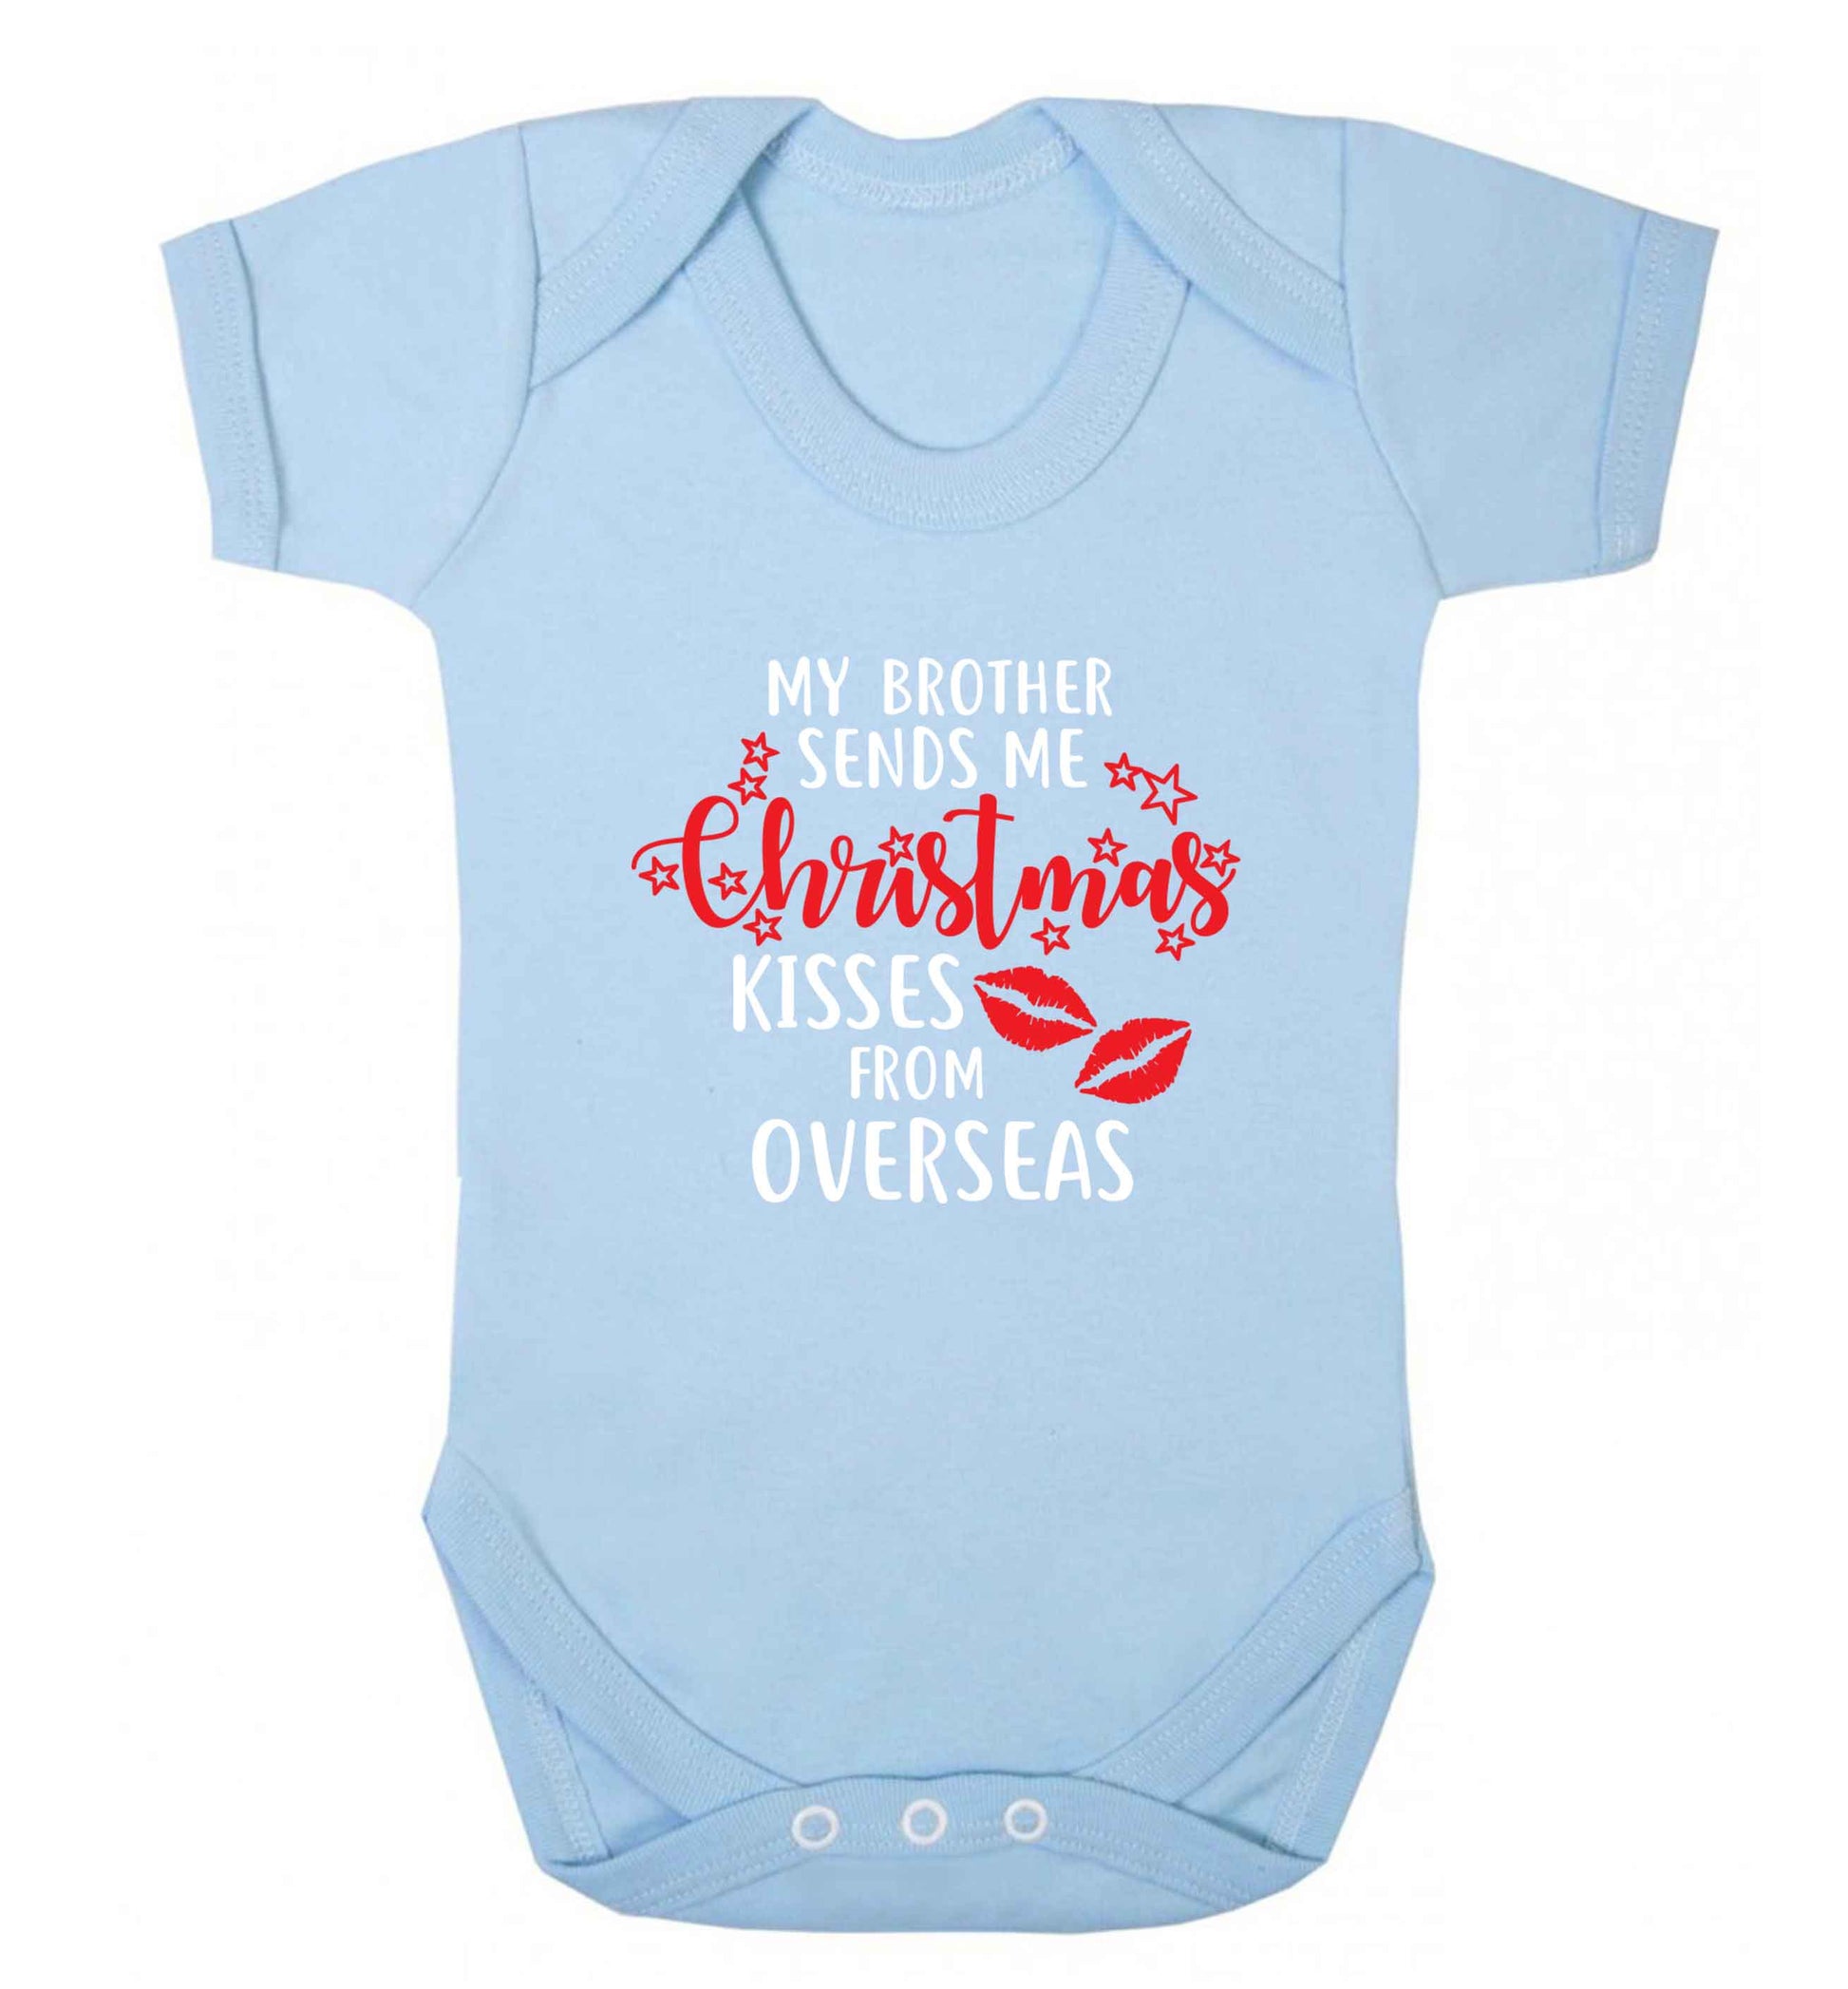 Brother Christmas Kisses Overseas baby vest pale blue 18-24 months